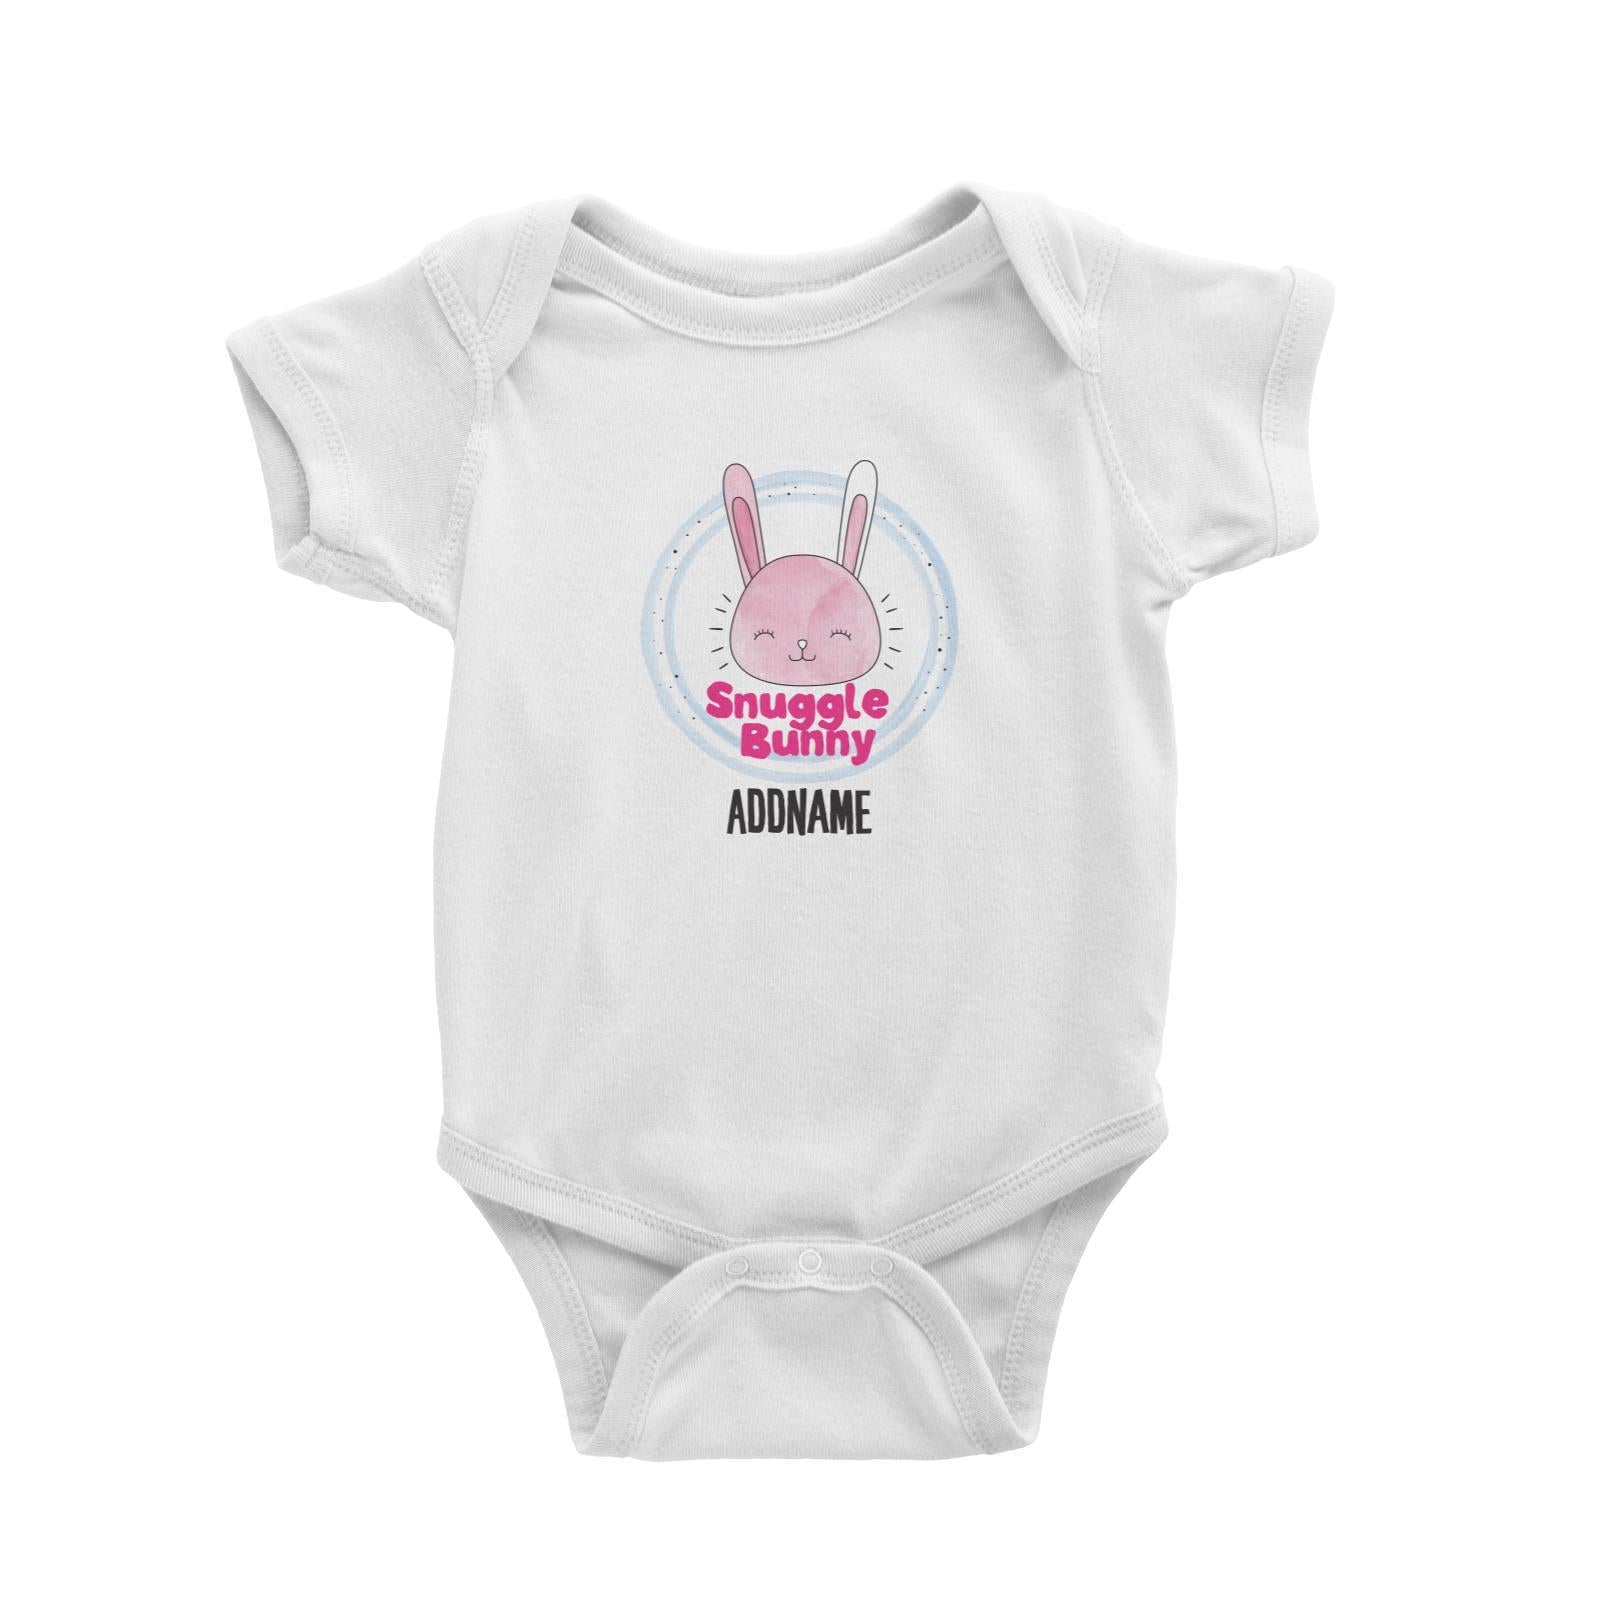 Cool Vibrant Series Snuggle Bunny Addname Baby Romper